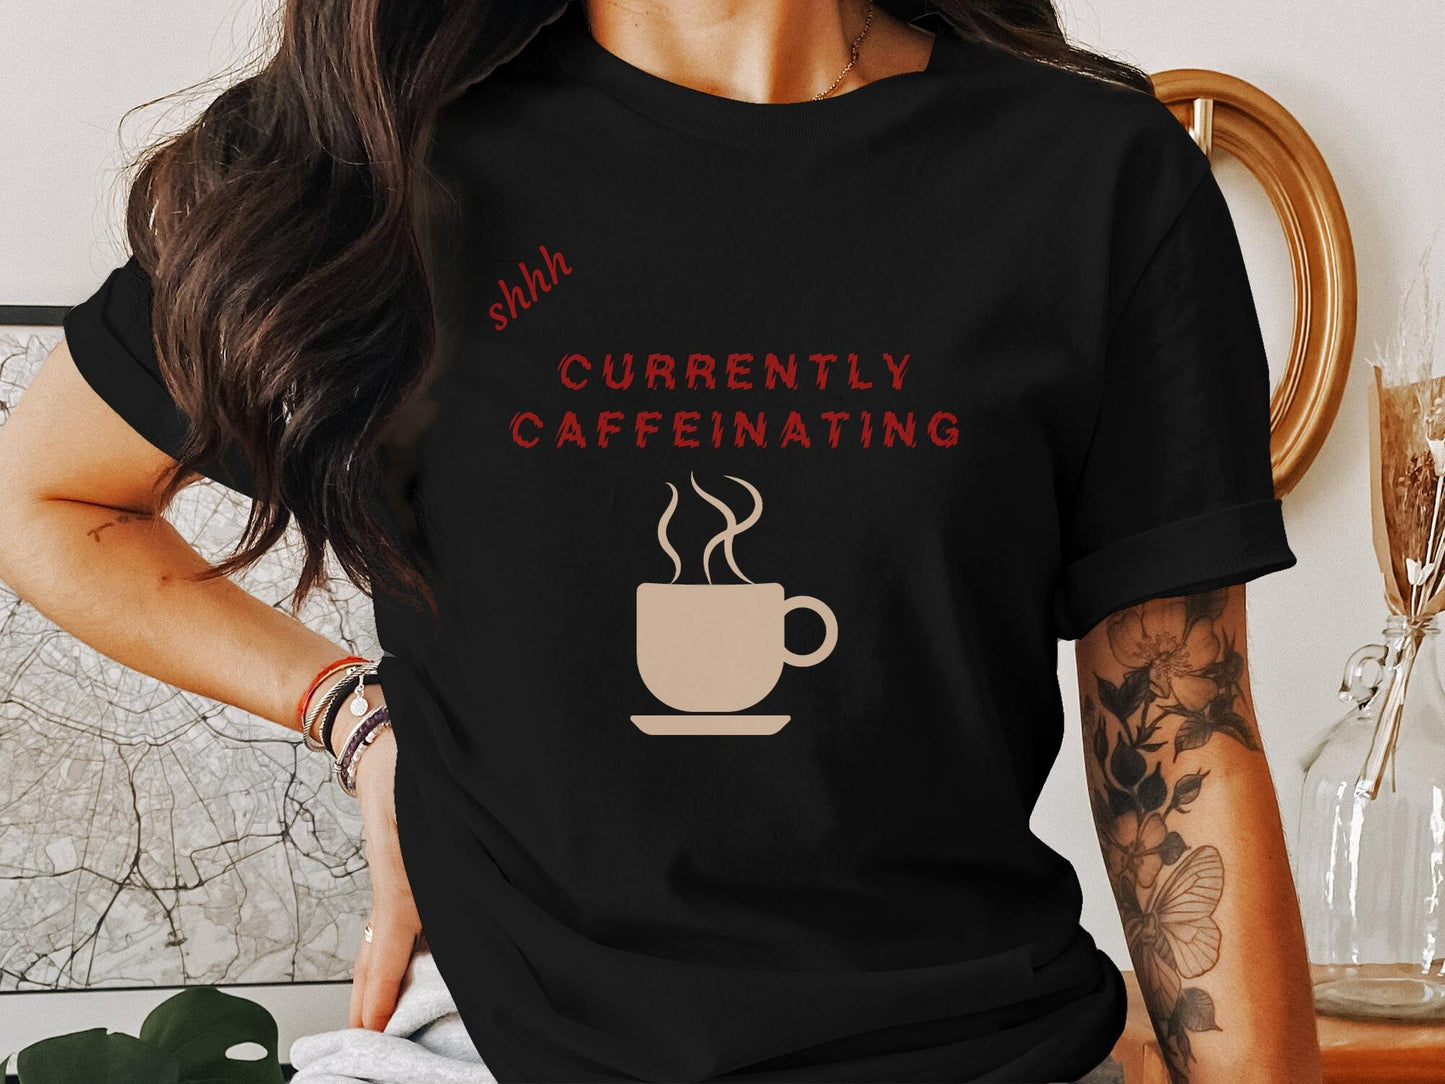 Shh, Currently Caffeinating" T-Shirt - Funny Coffee Lover Tee T-Shirt, Funny Coffee Shirt, Caffeine Shirt, Coffee Lover Shirt